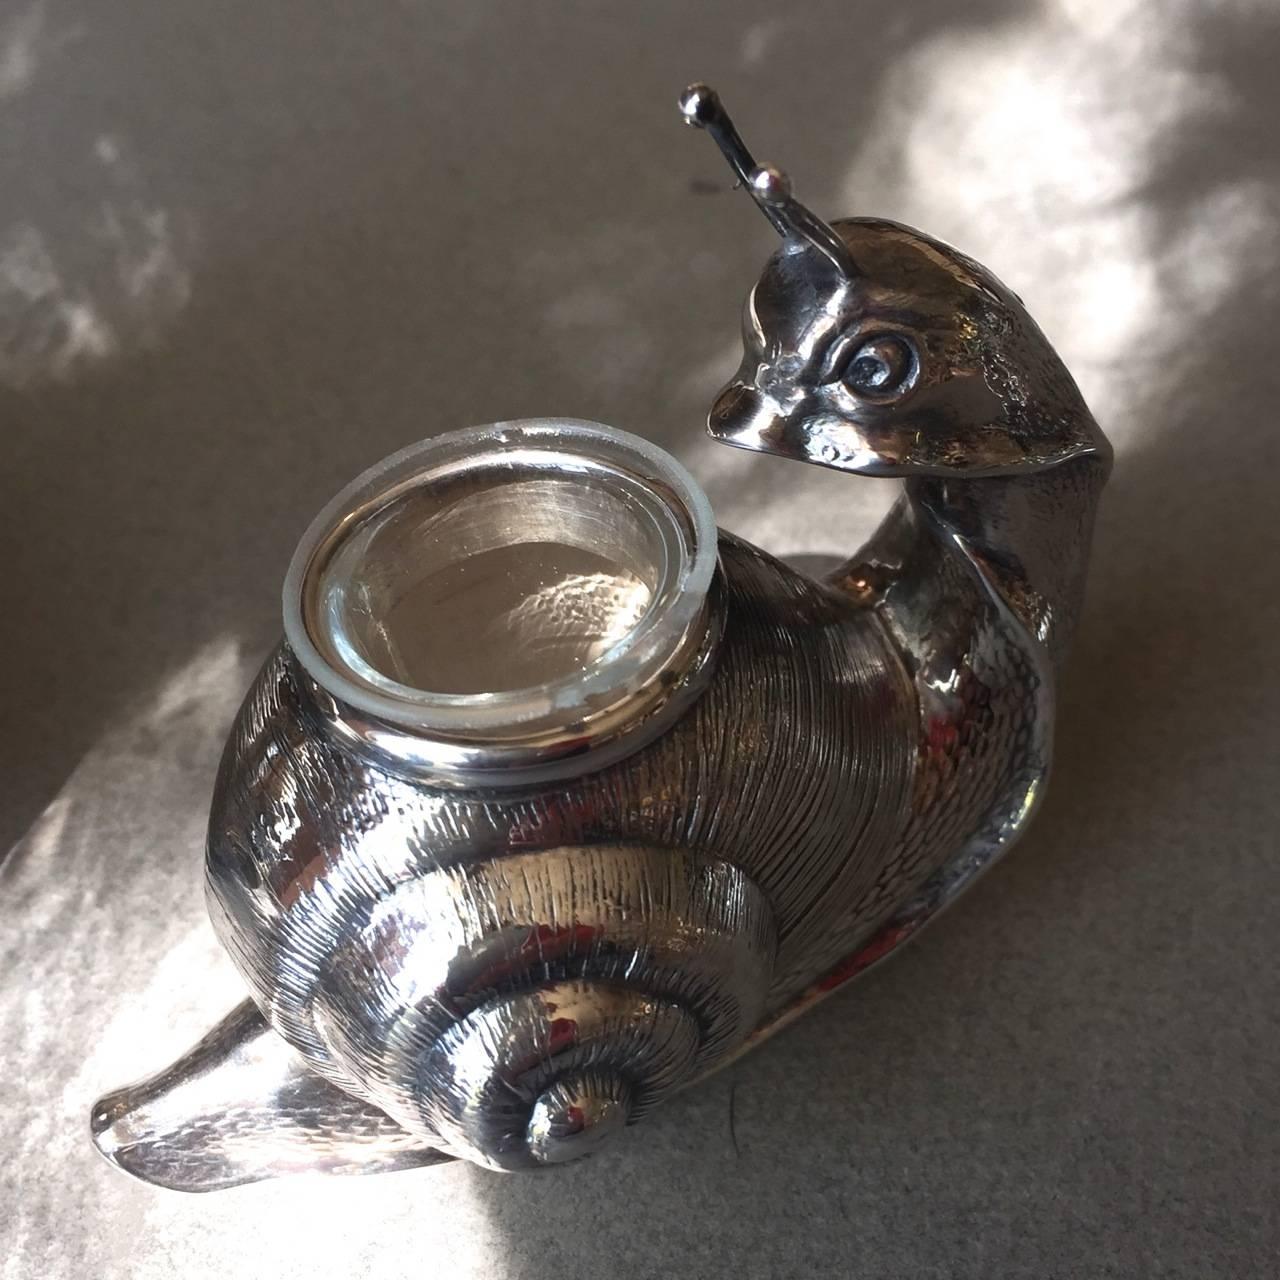 Camusso set of four sterling silver snail salt cellars, Peru.

A set of four, intricately detailed snail salt cellars. Each snail has a large shell with spiral stripes. The snail's body, including the head and foot, extends below the shell with